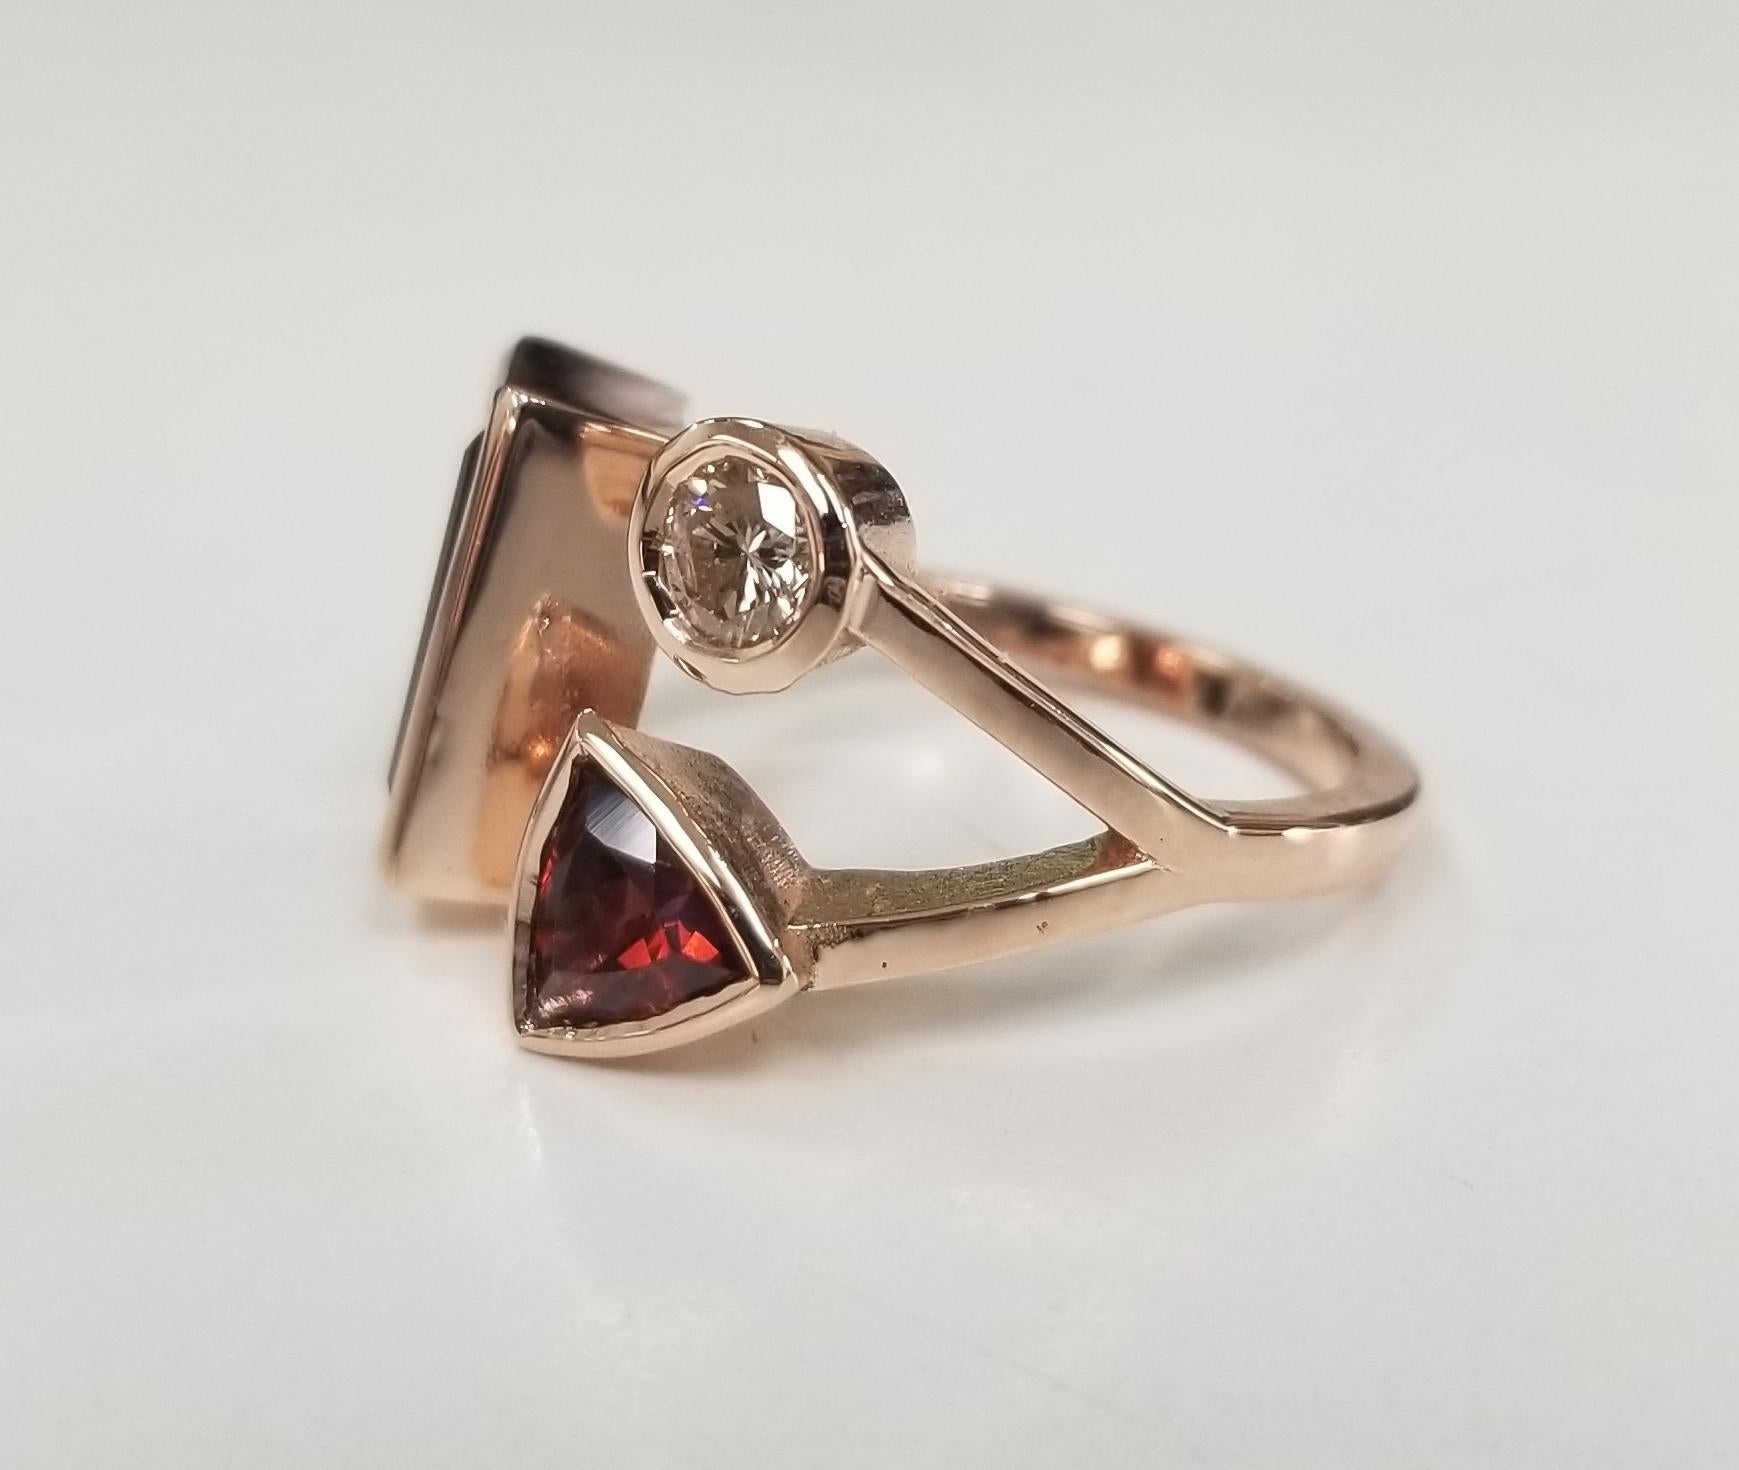 14K rose gold Tourmaline and Diamond split ring
Specifications:
    MAIN stone:   Diamond round .22cts.
    Additional stones:  2 Tourmaline 1.83cts.
    metal: 14K ROSE GOLD
    type: RING
    weight: 5 GRS 
    size: 5.5 US
*Pick your stones and